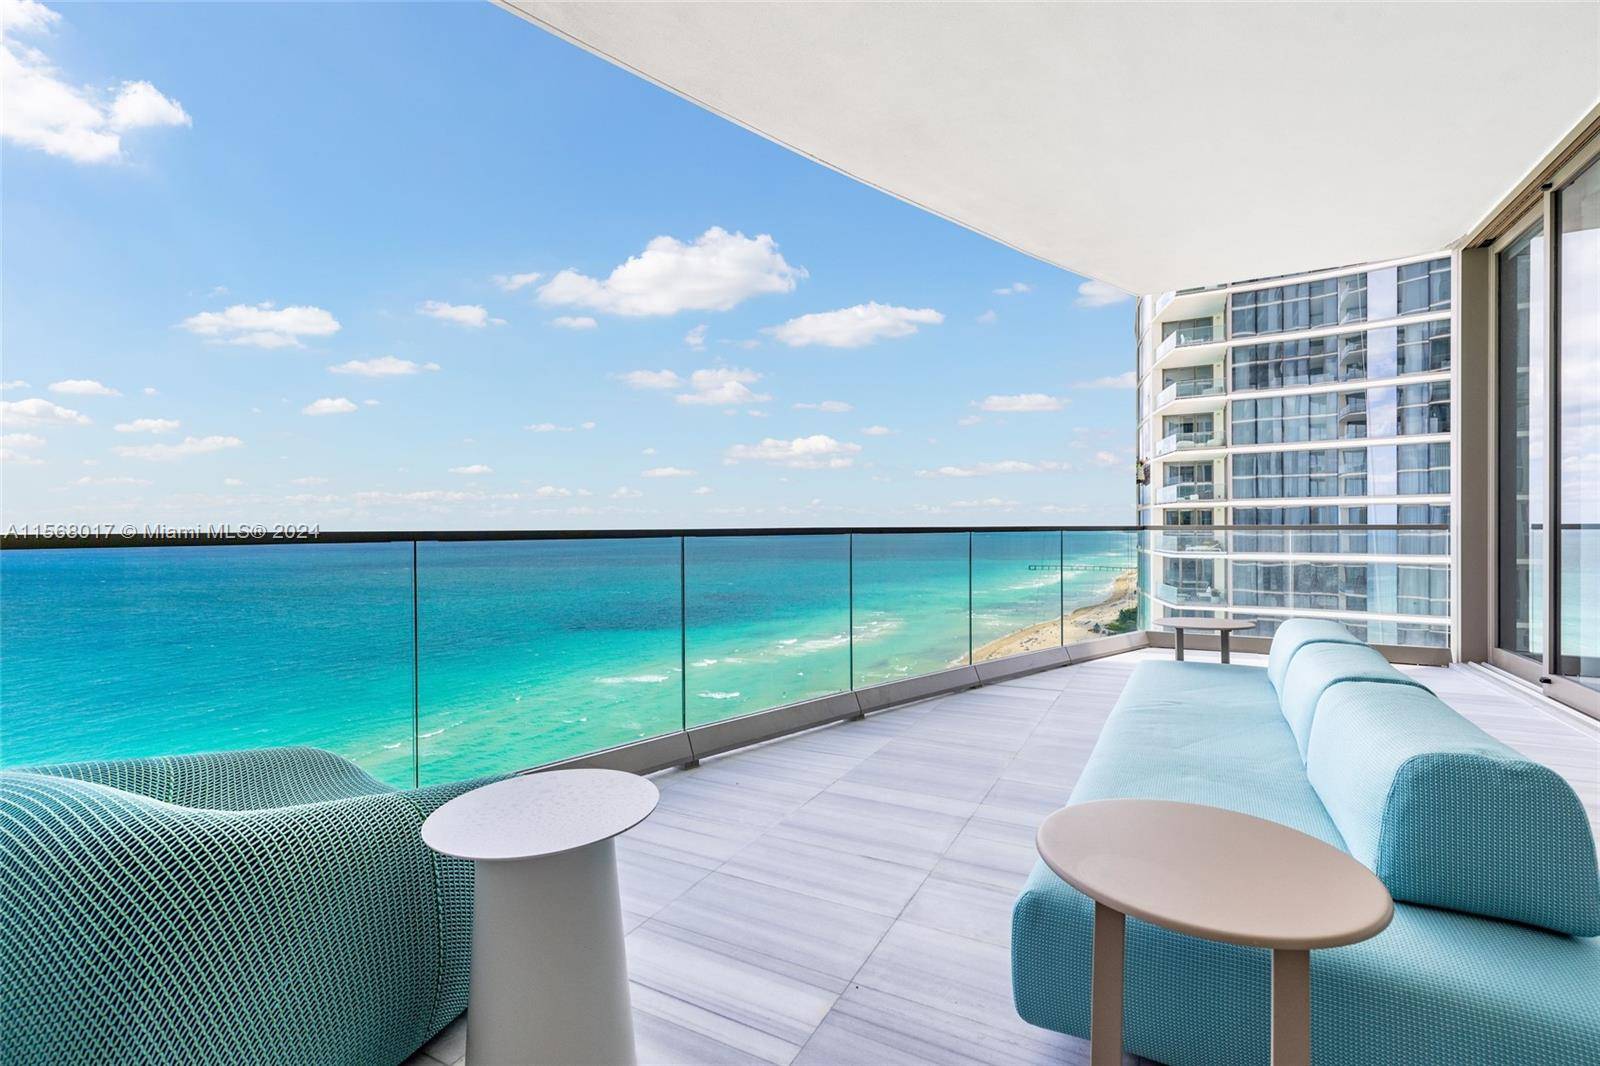 Experience the pinnacle of luxury living at Estates at Acqualina.